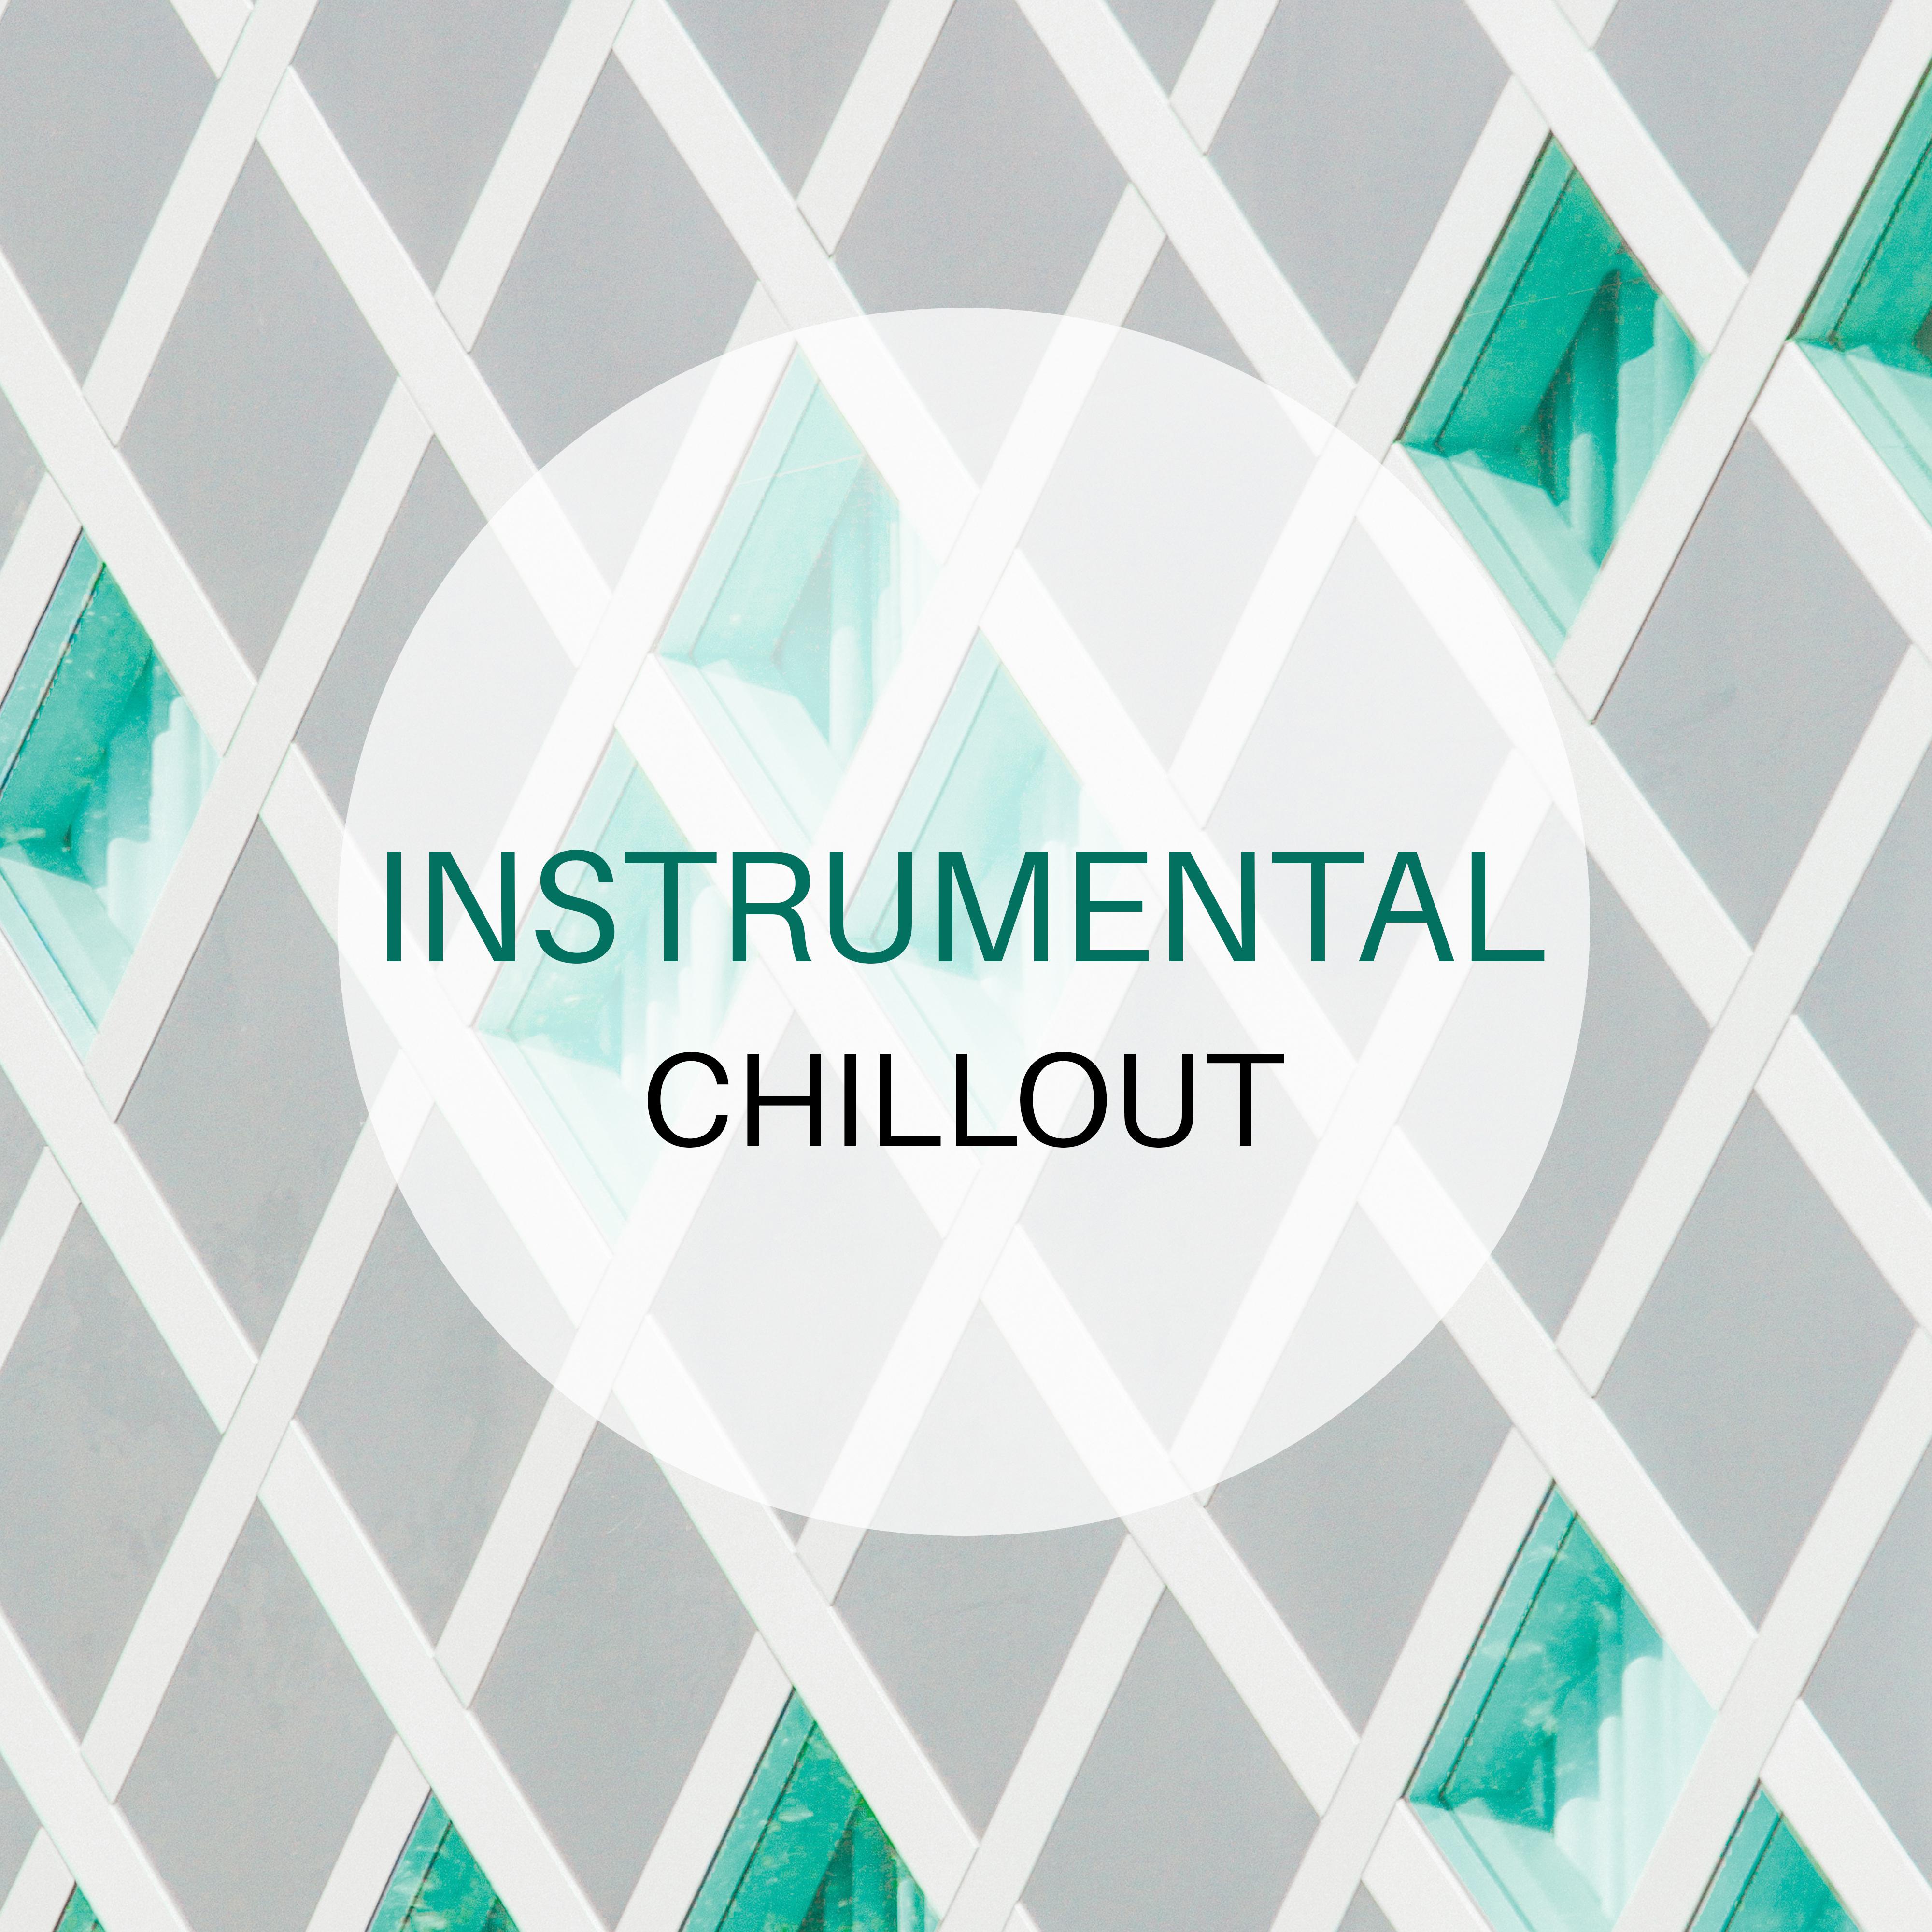 Instrumental Chillout